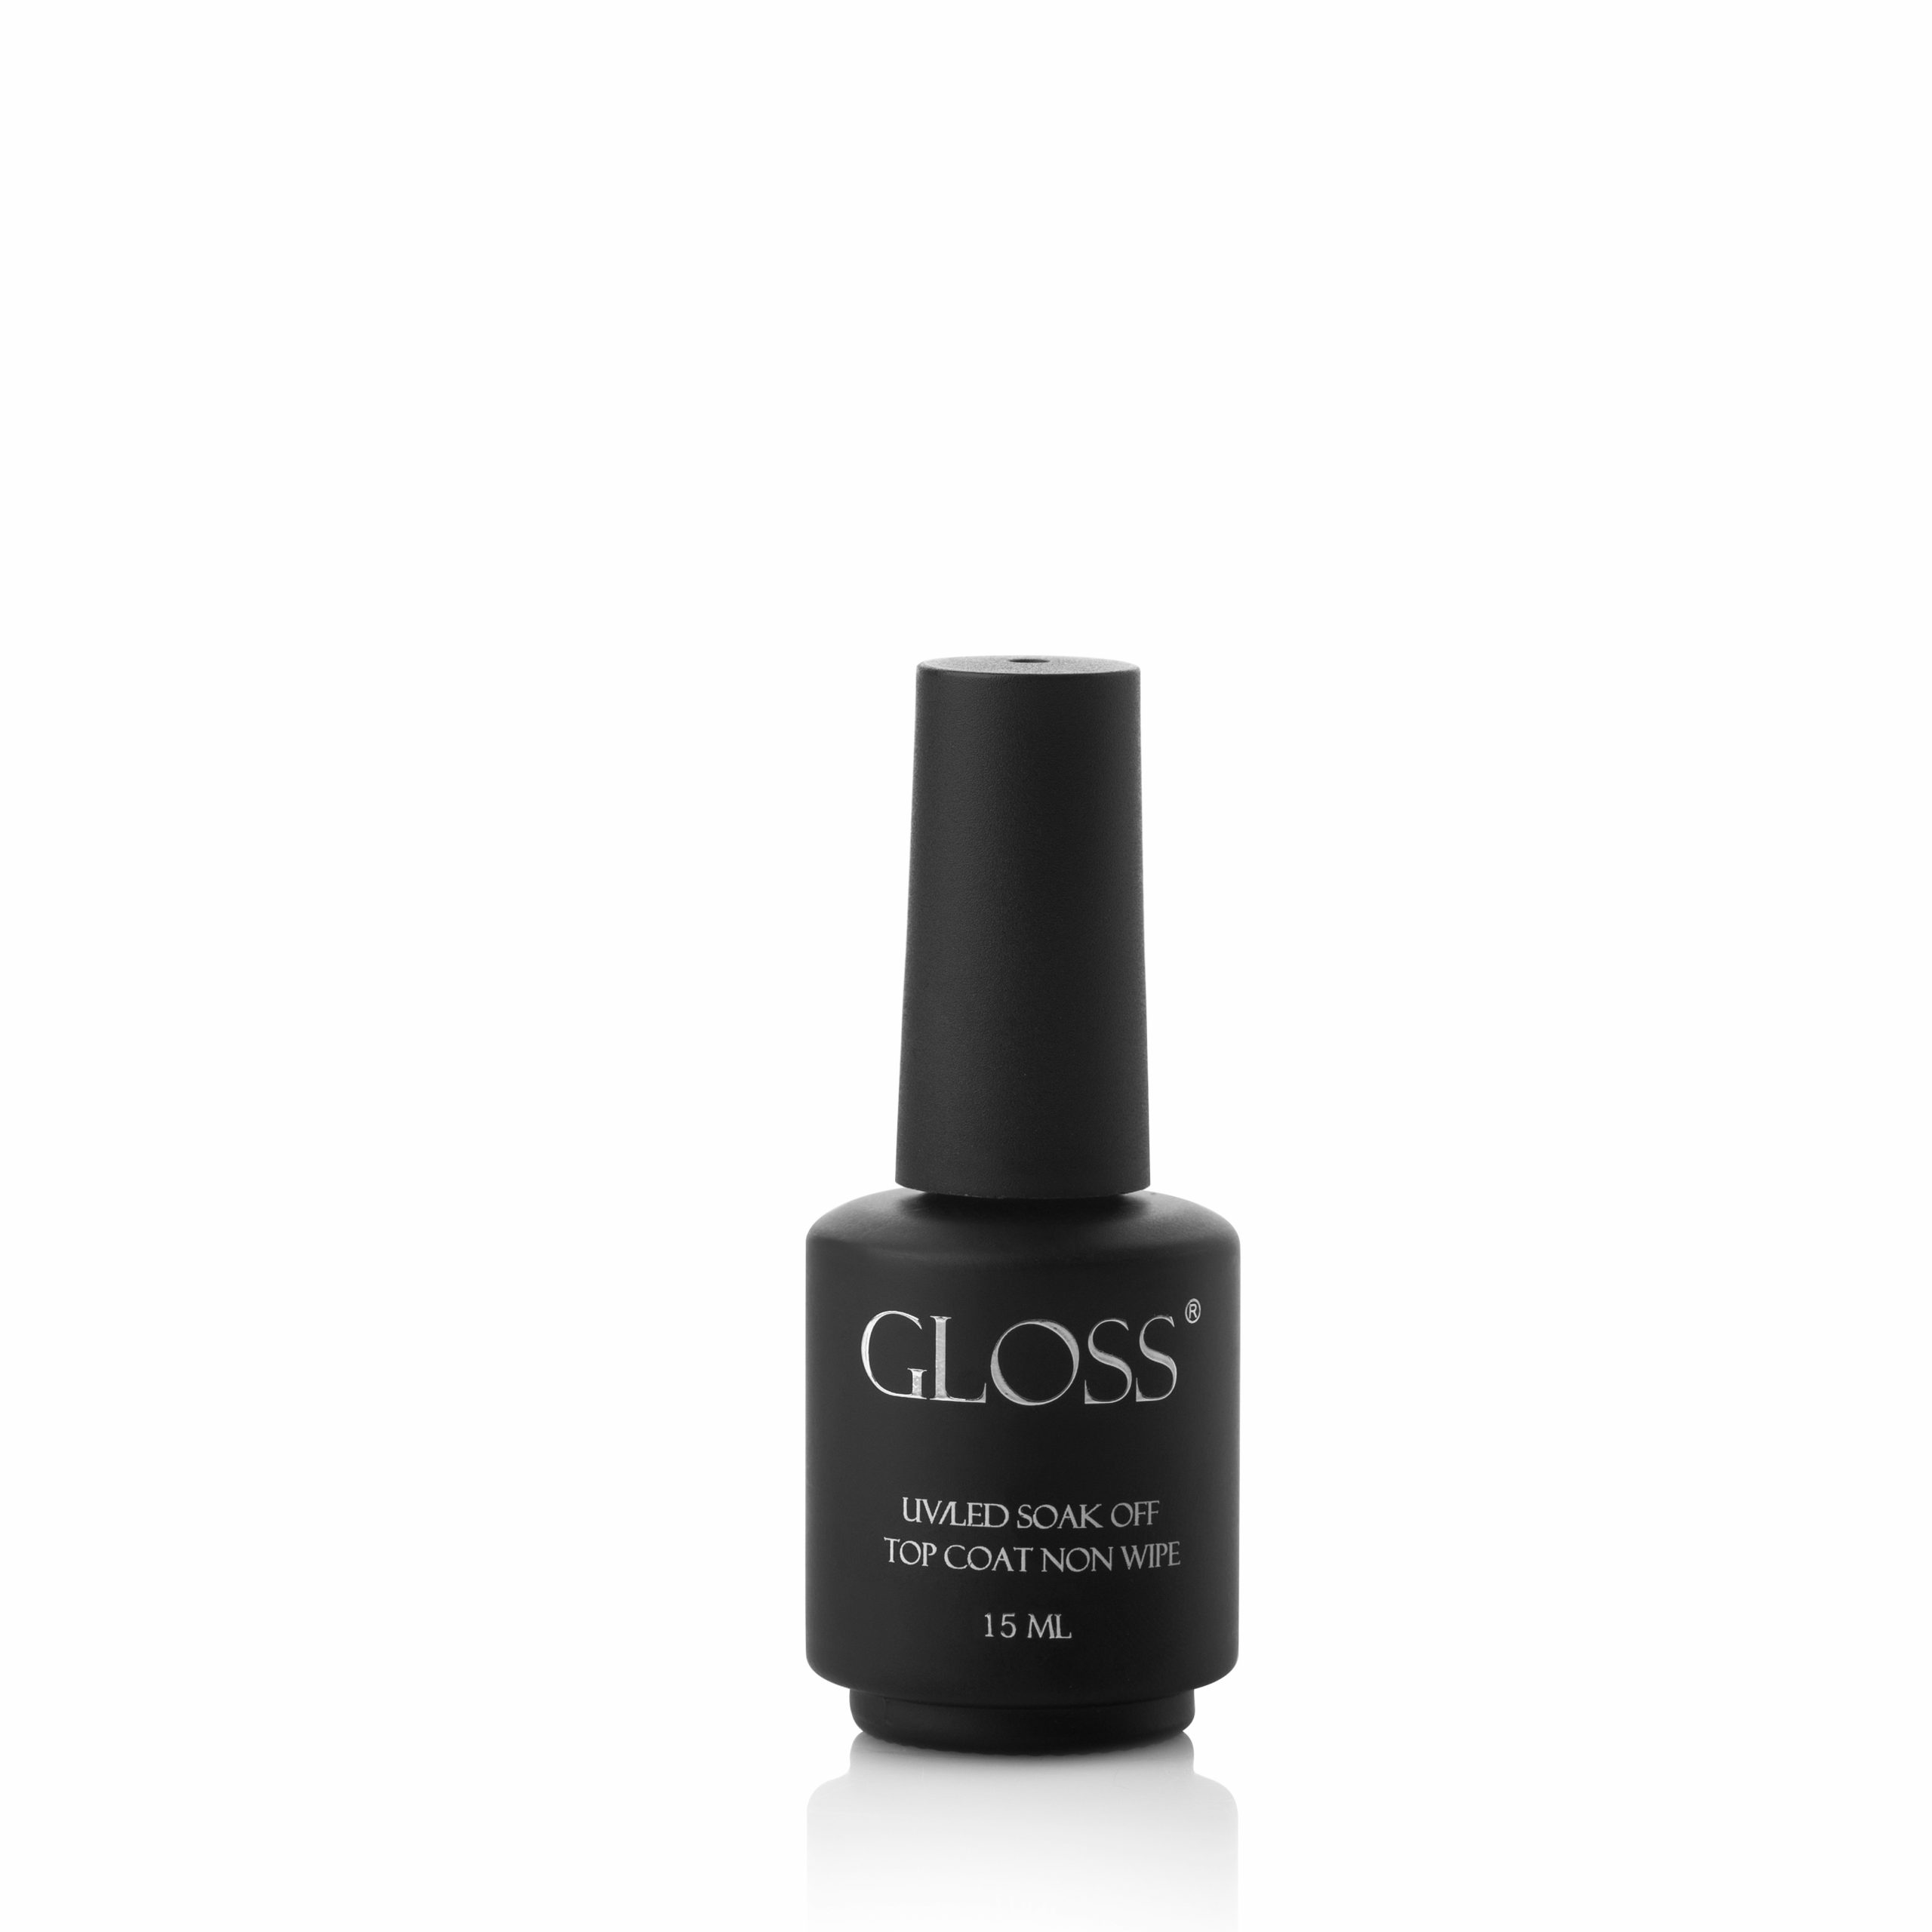 Top without a sticky layer GLOSS Top Coat Non Wipe, 15 ml